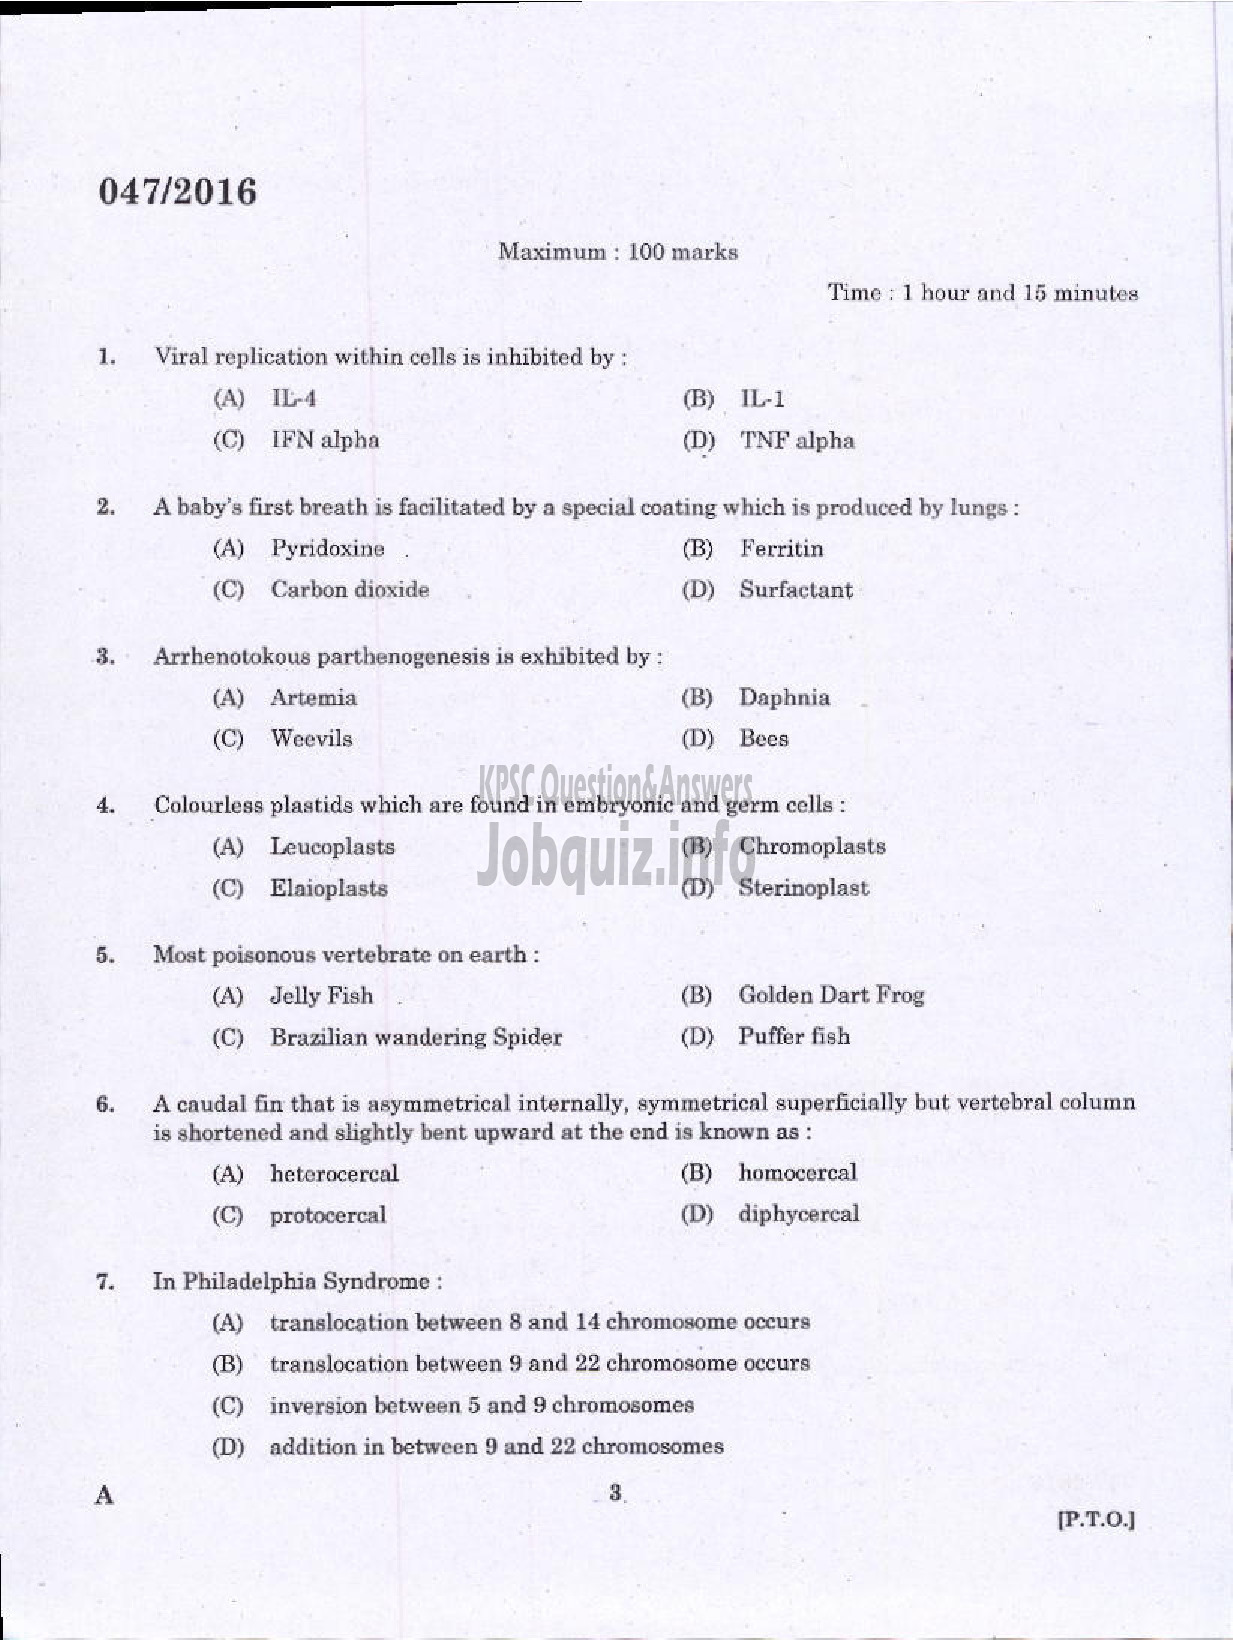 Kerala PSC Question Paper - OTHER RESEARCH ASSISTANT ZOOLOGY FISHERIES-1